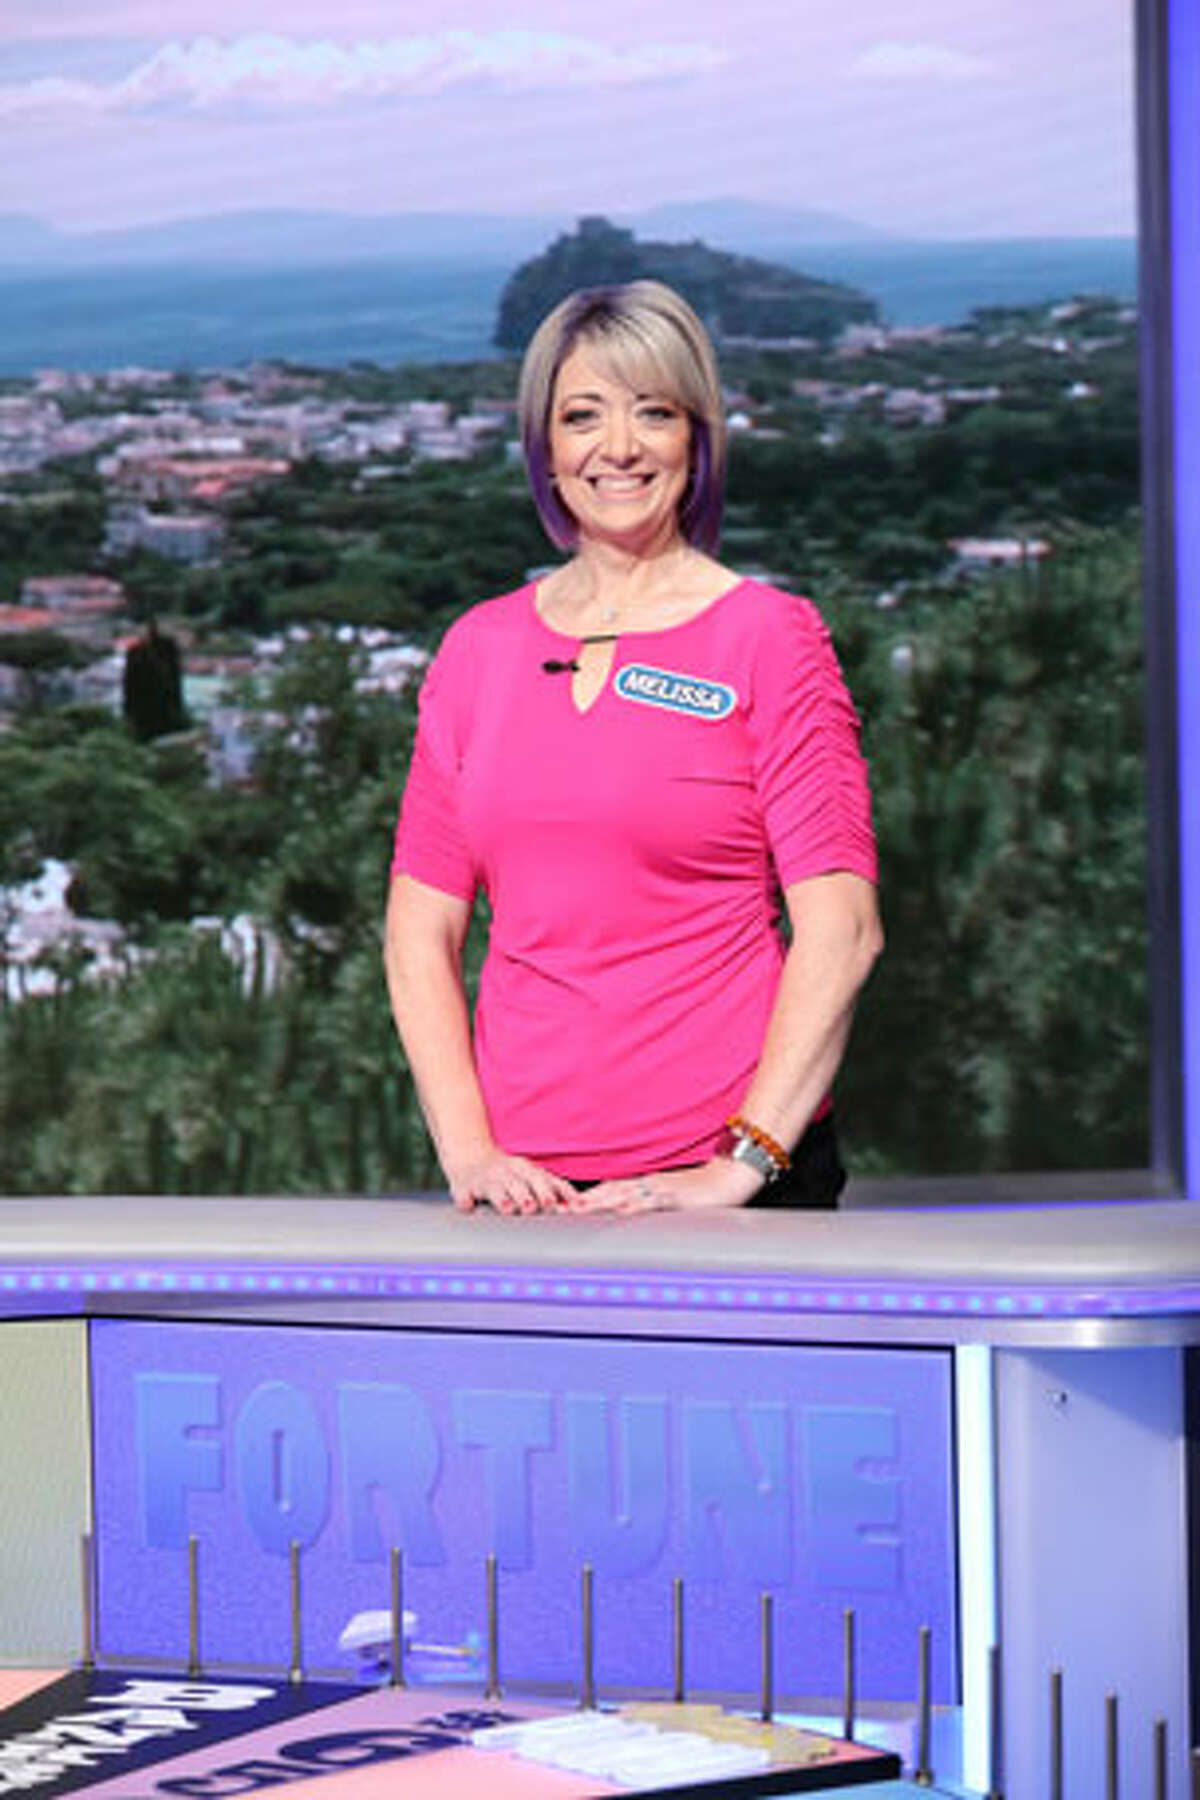 Melissa Grega of Troy will be a contestant on Wheel of Fortune airing Monday. Grega is a hairdresser who is married with two children. She says she enjoys golfing, traveling, being on the lake and spending time with her grandson.